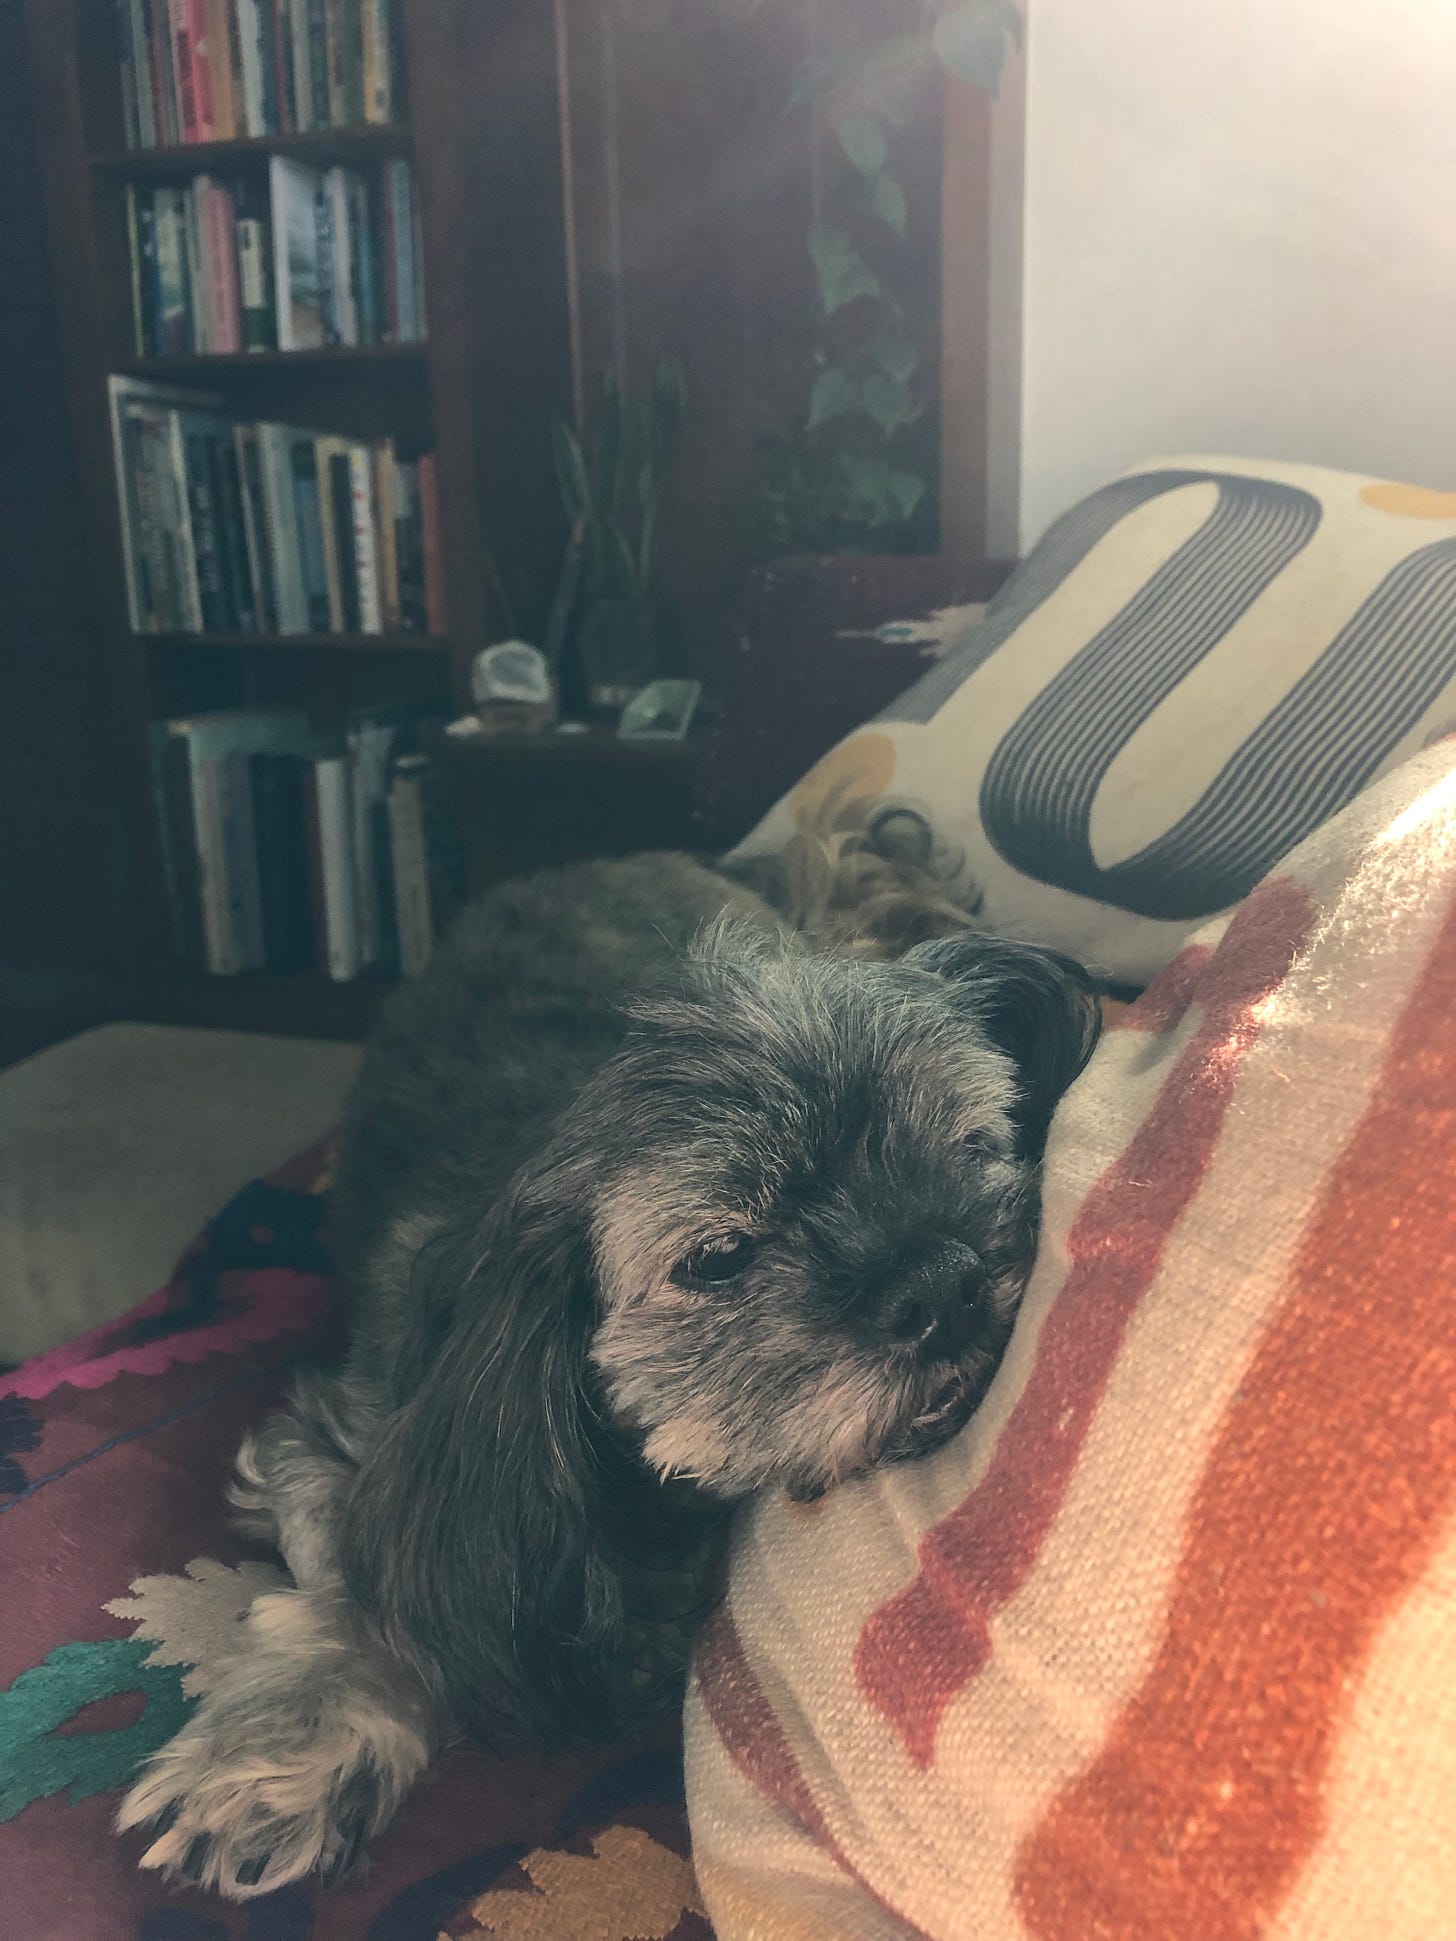 a small old gray dog is haloed by sunlight as she rests on a couch covered in colorful pillows. there are plant vines and bookshelves in the background behind her.